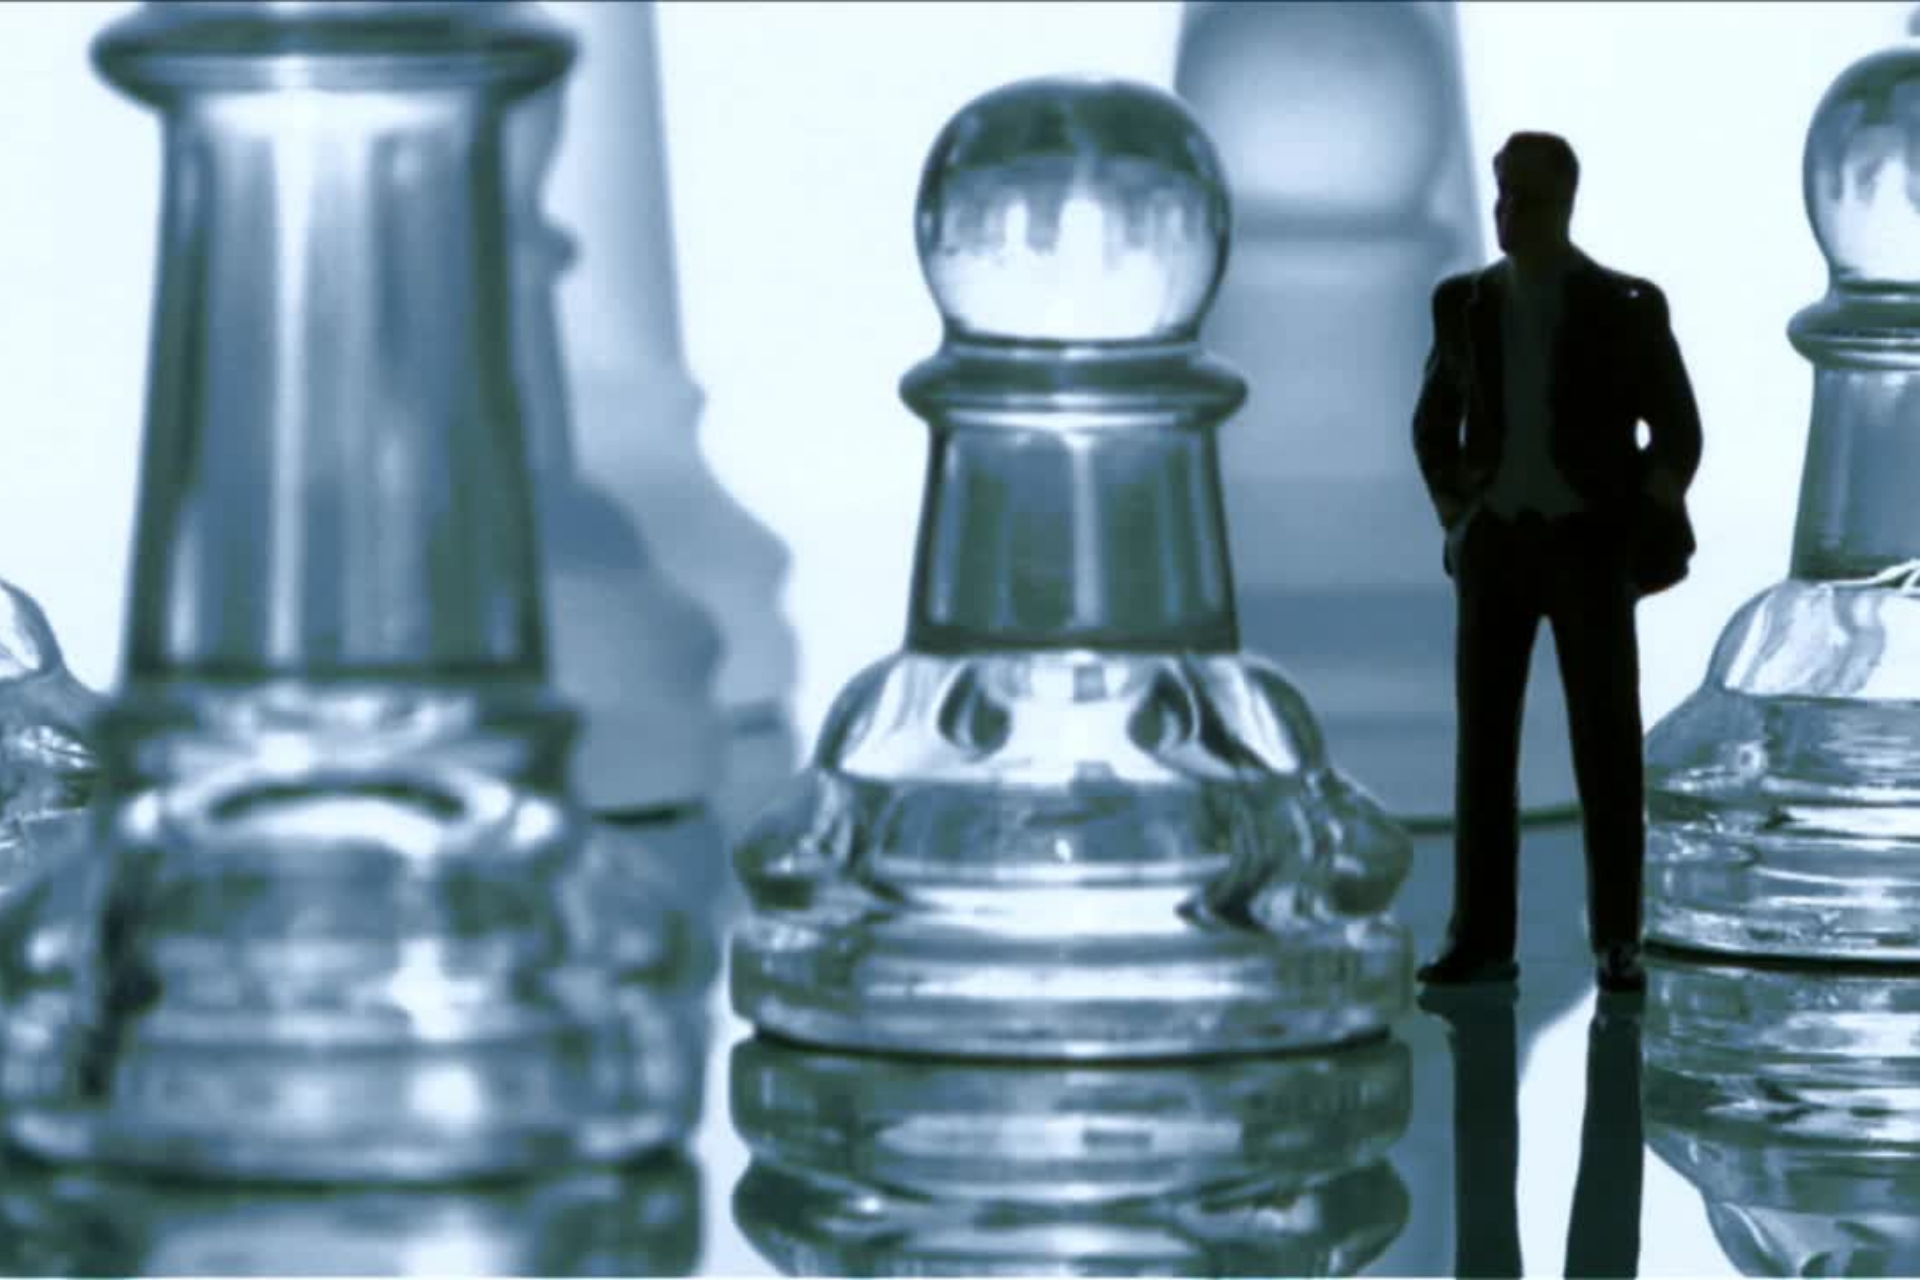 The performance of a business depends on various factors, strategy is one of them. Business strategies should be determined by considering the company’s objectives and goals, industry trends, nature of the entity, and budget. No matter which strategy is implemented, it will inevitably impact the financial statements.